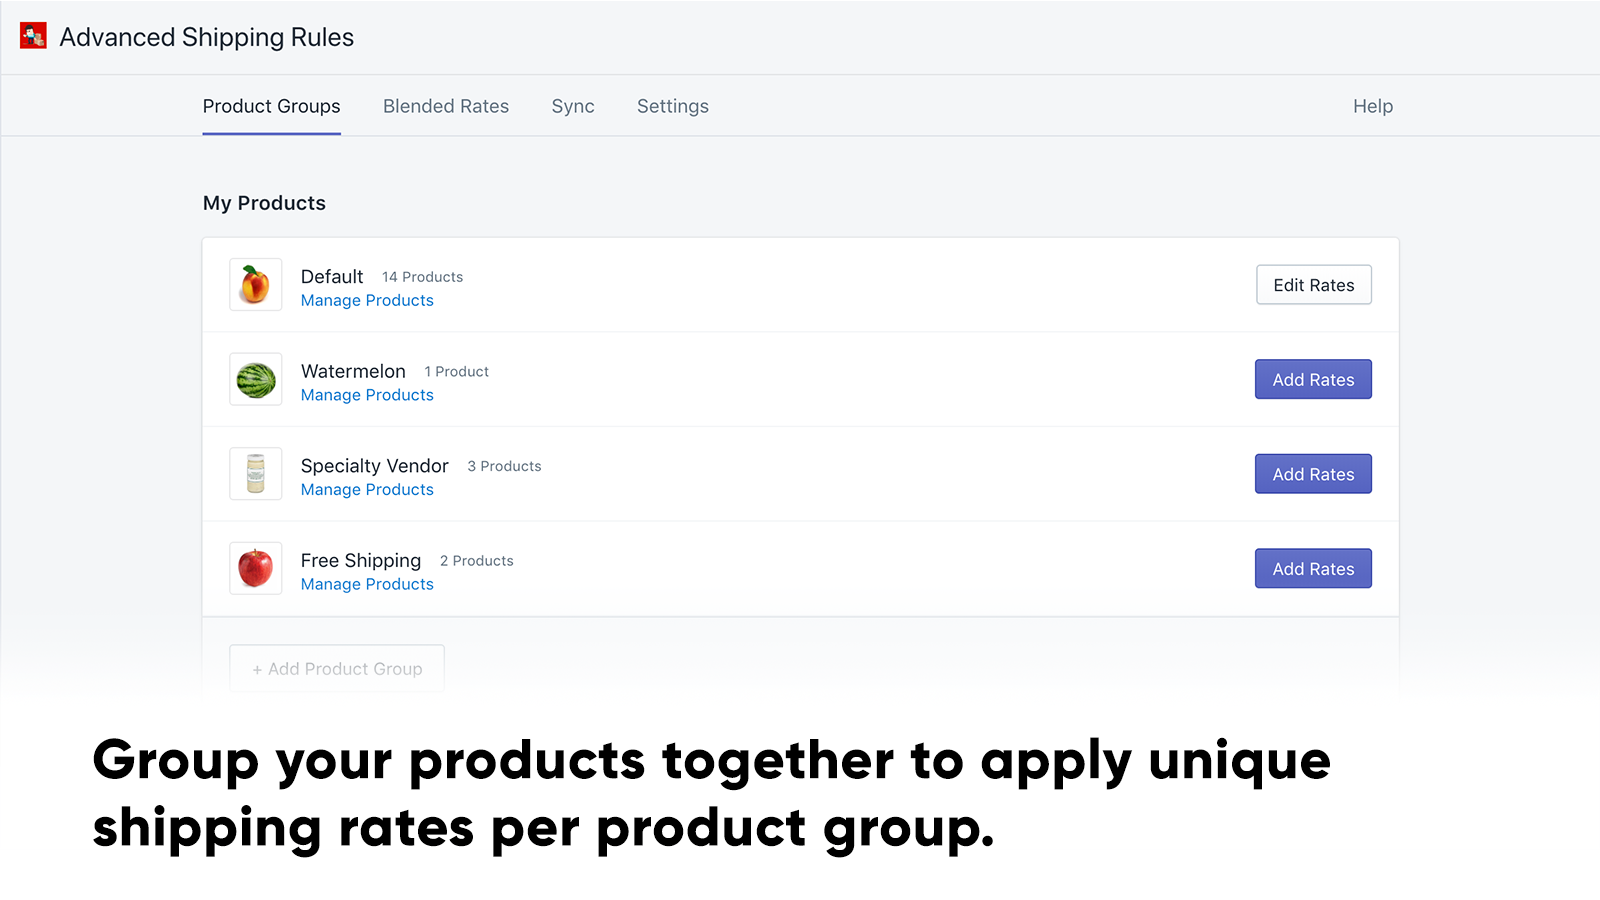 Group your products together to apply unique shipping rates